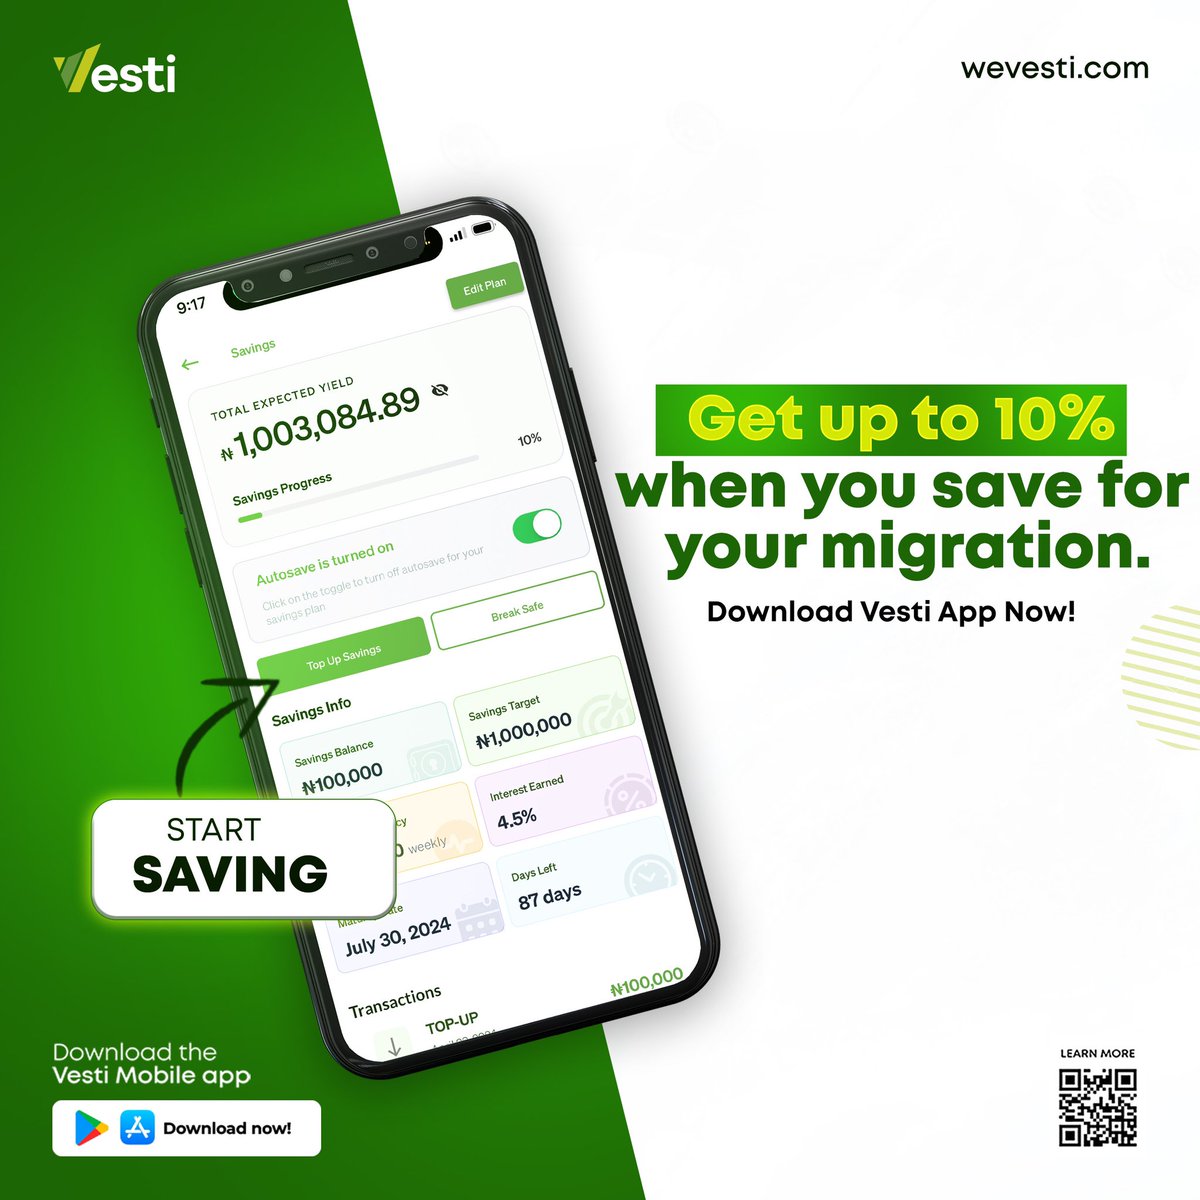 Level up your migration savings with Safelock by Vesti! This new feature lets you lock away up to 10% of your deposits, helping you reach your dream destination faster. Download the Vesti app today and unlock your migration goals! #SafelockByVesti #VestiApp #MigrationSavings